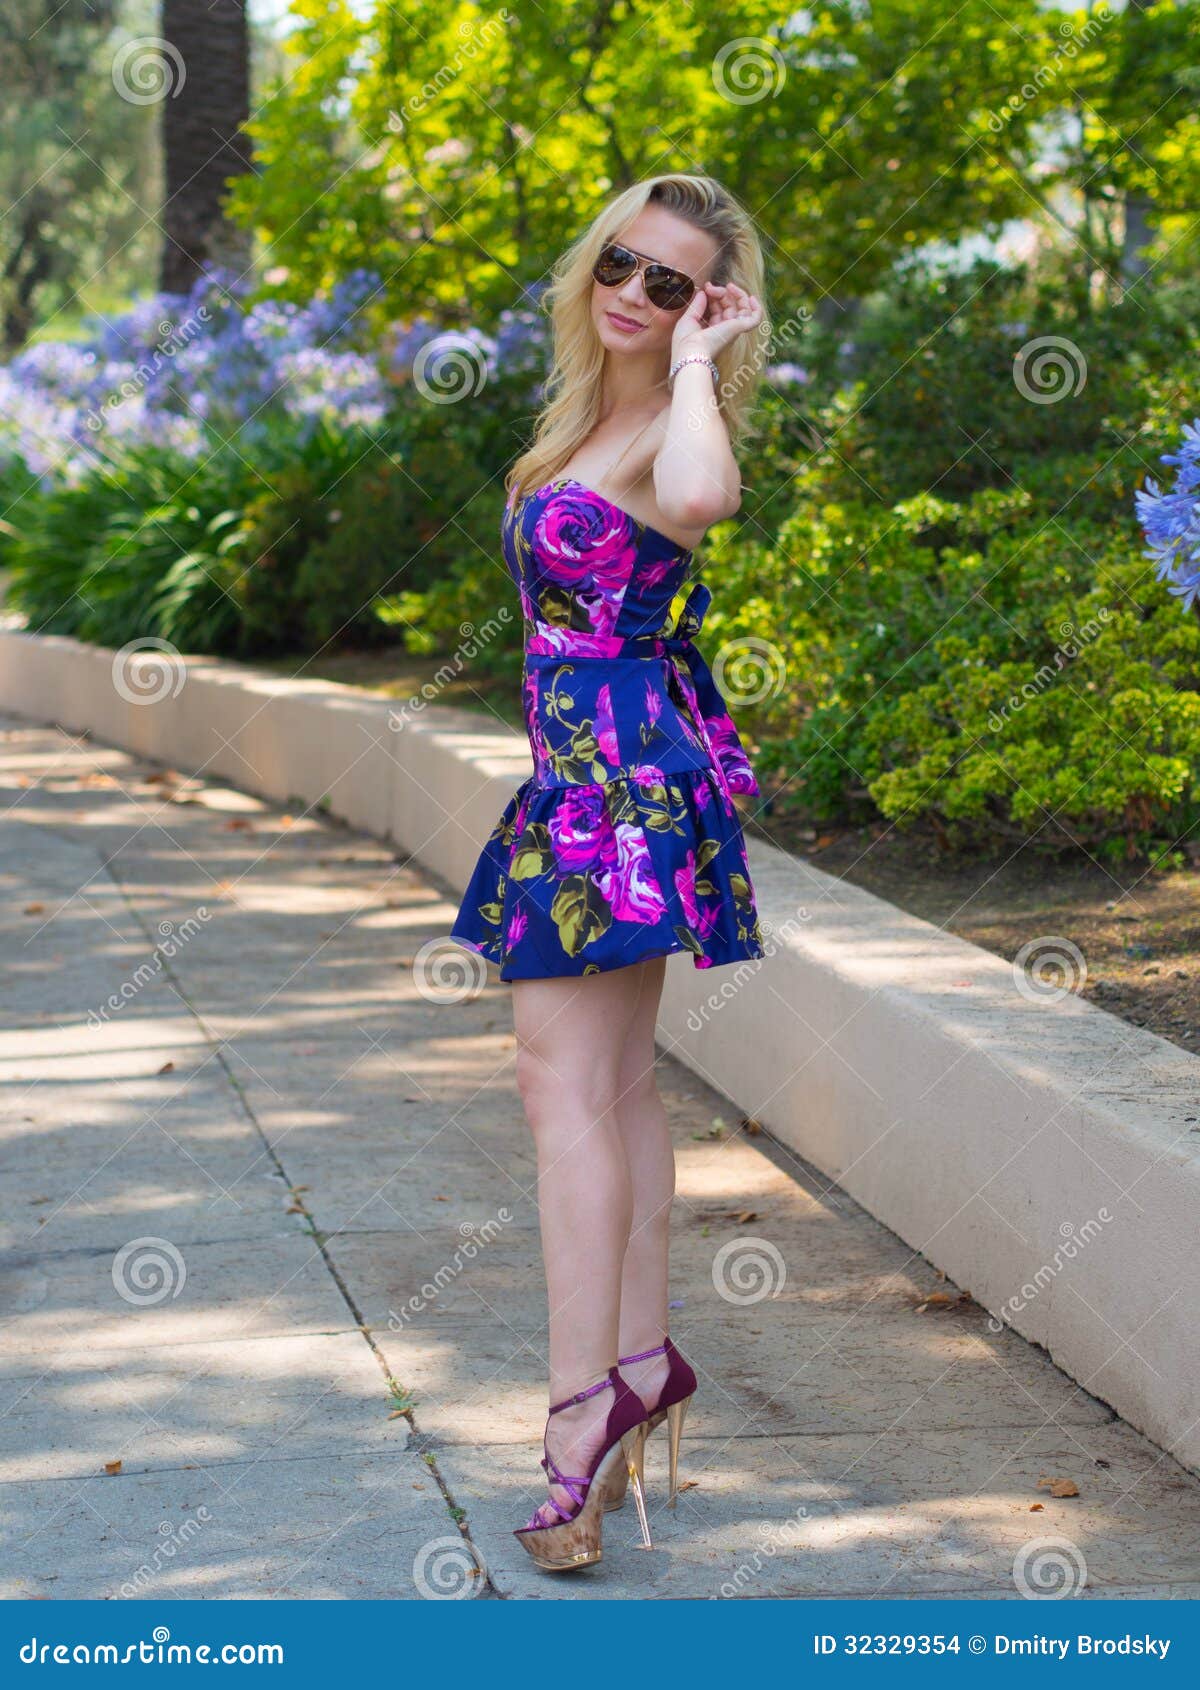 Elegant Young Blond Girl Posing In A Dress And High Heels Stock Photo,  Picture and Royalty Free Image. Image 22071165.